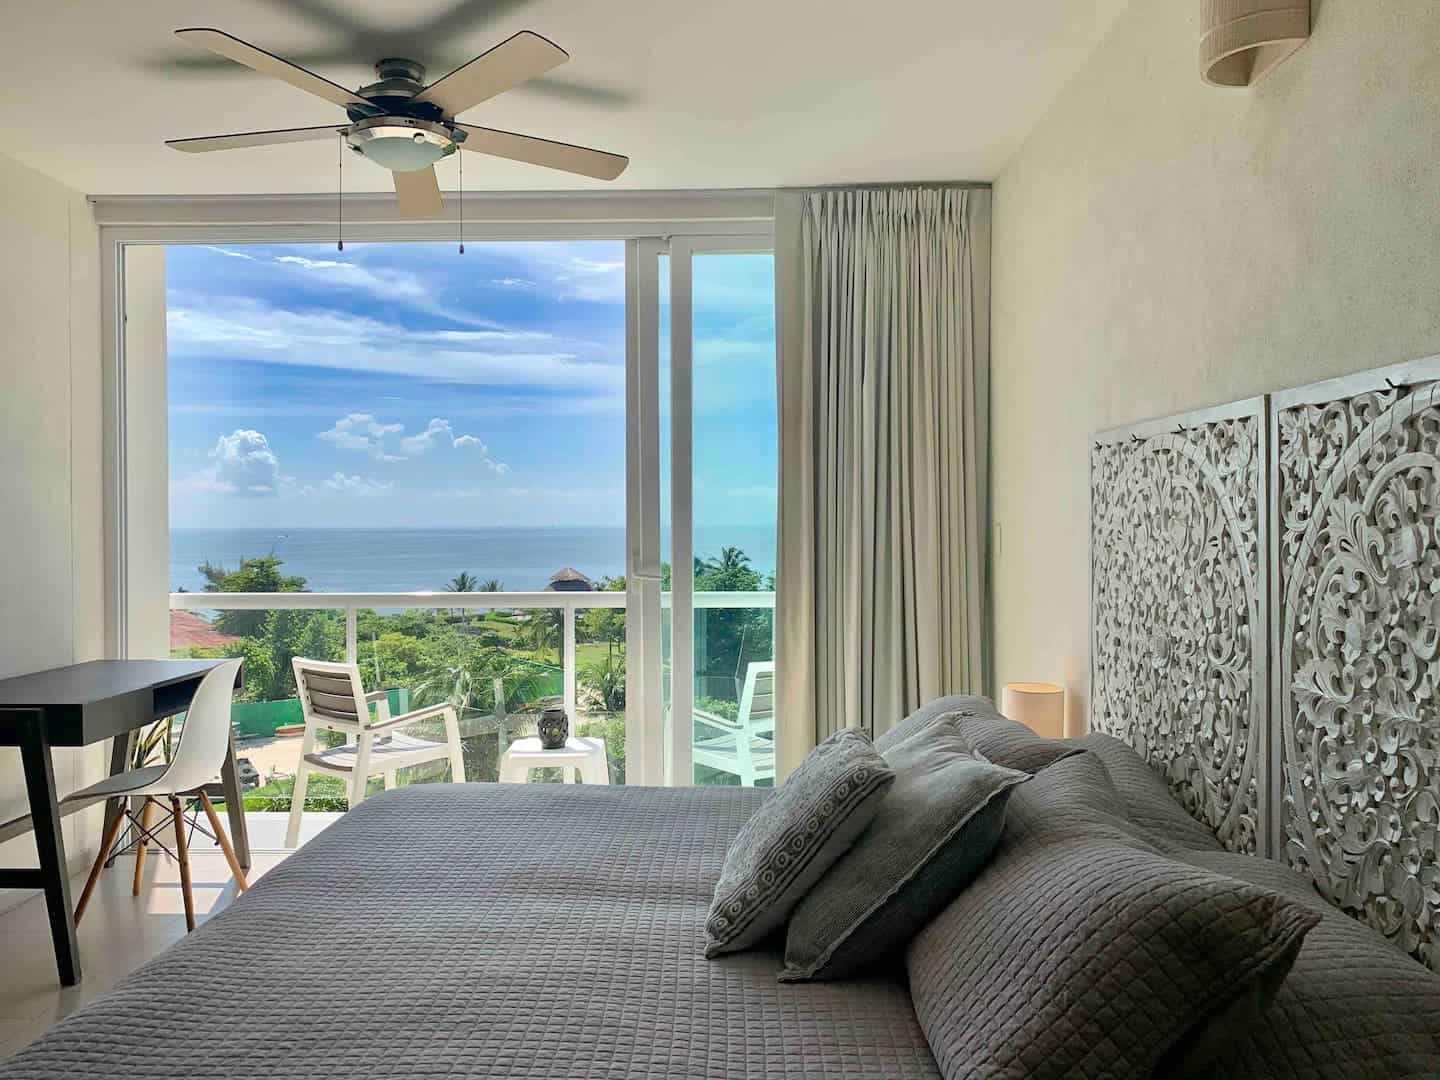 Image of Airbnb rental in Cancun, Mexico